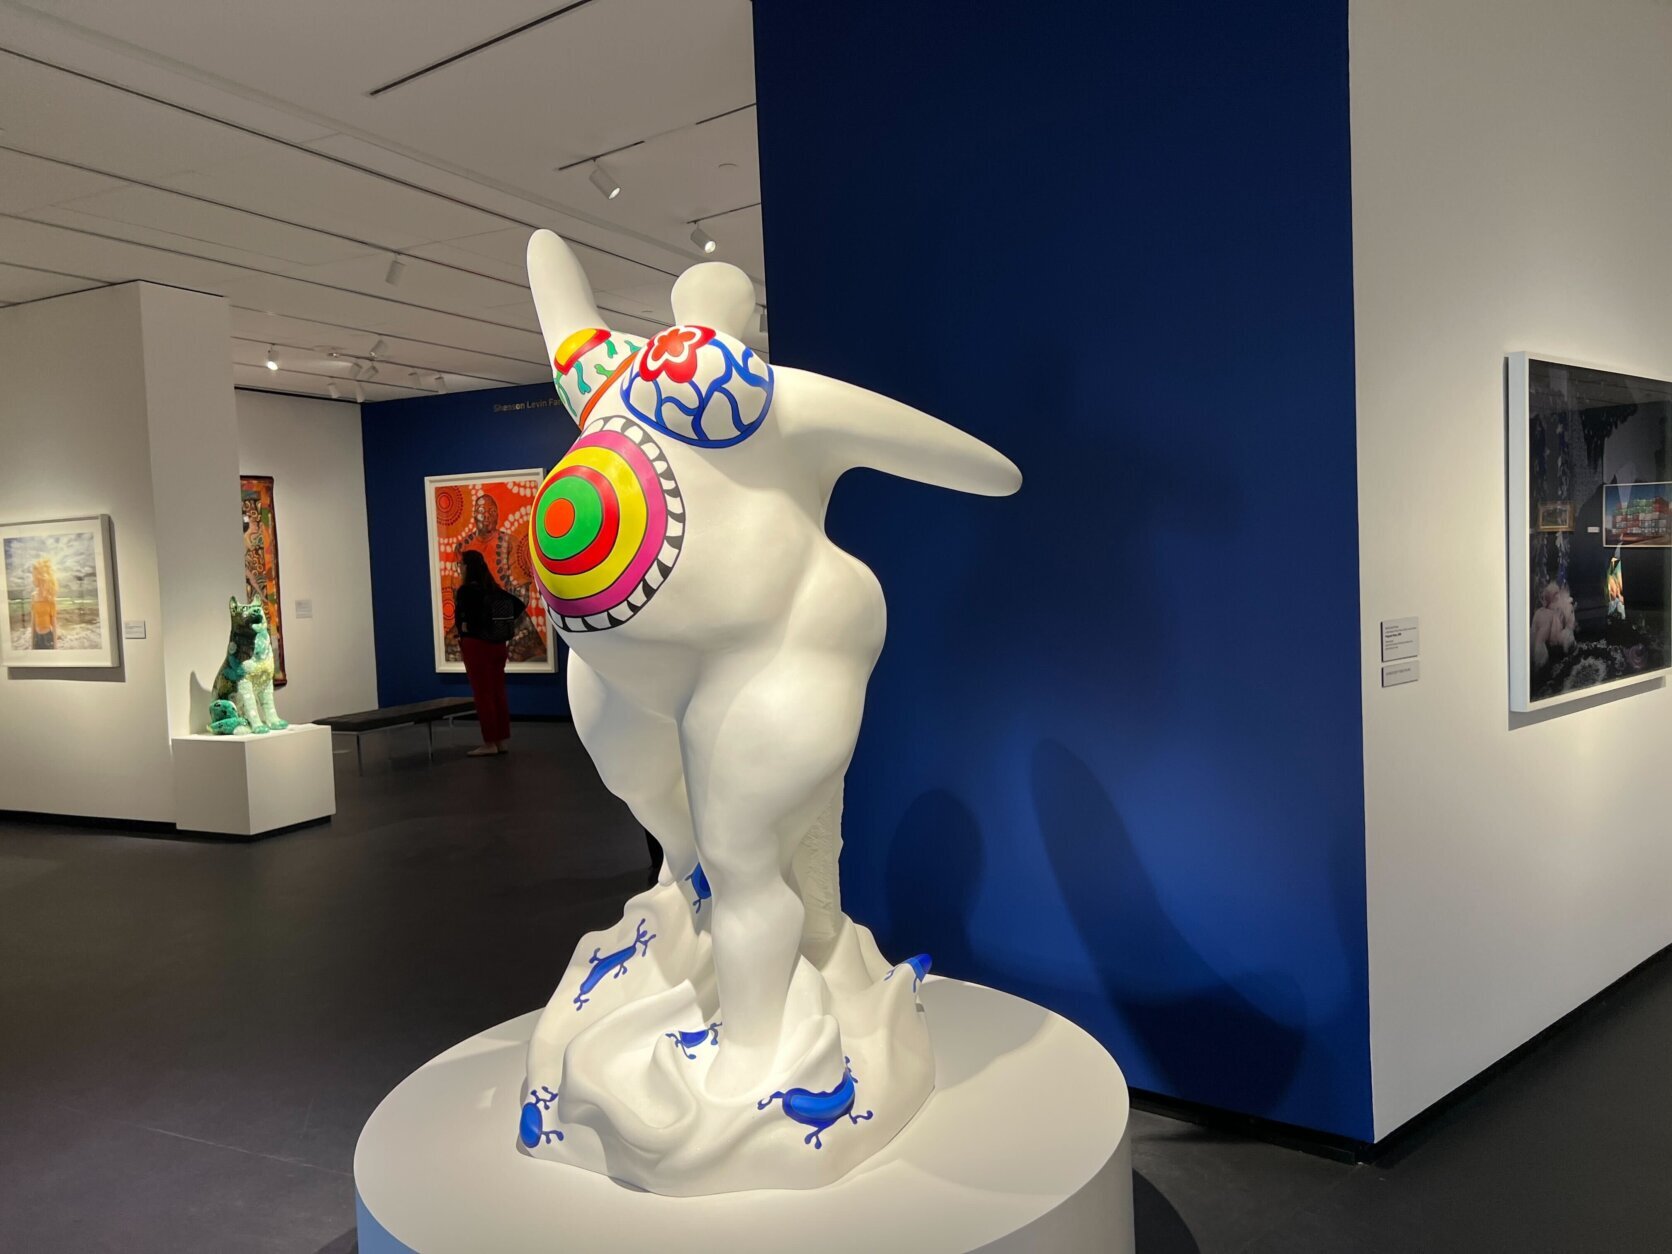 <p>Another piece that may leave some viewers stopped in their tracks is a sculpture on the third floor by Niki de Saint Phalle.</p>
<p>&#8220;She is, as I would say, open and welcoming and a very important statement about the way in which we like to embrace art, and tell stories,&#8221; Sterling said of the sculpture, which was a gift to the museum.</p>
